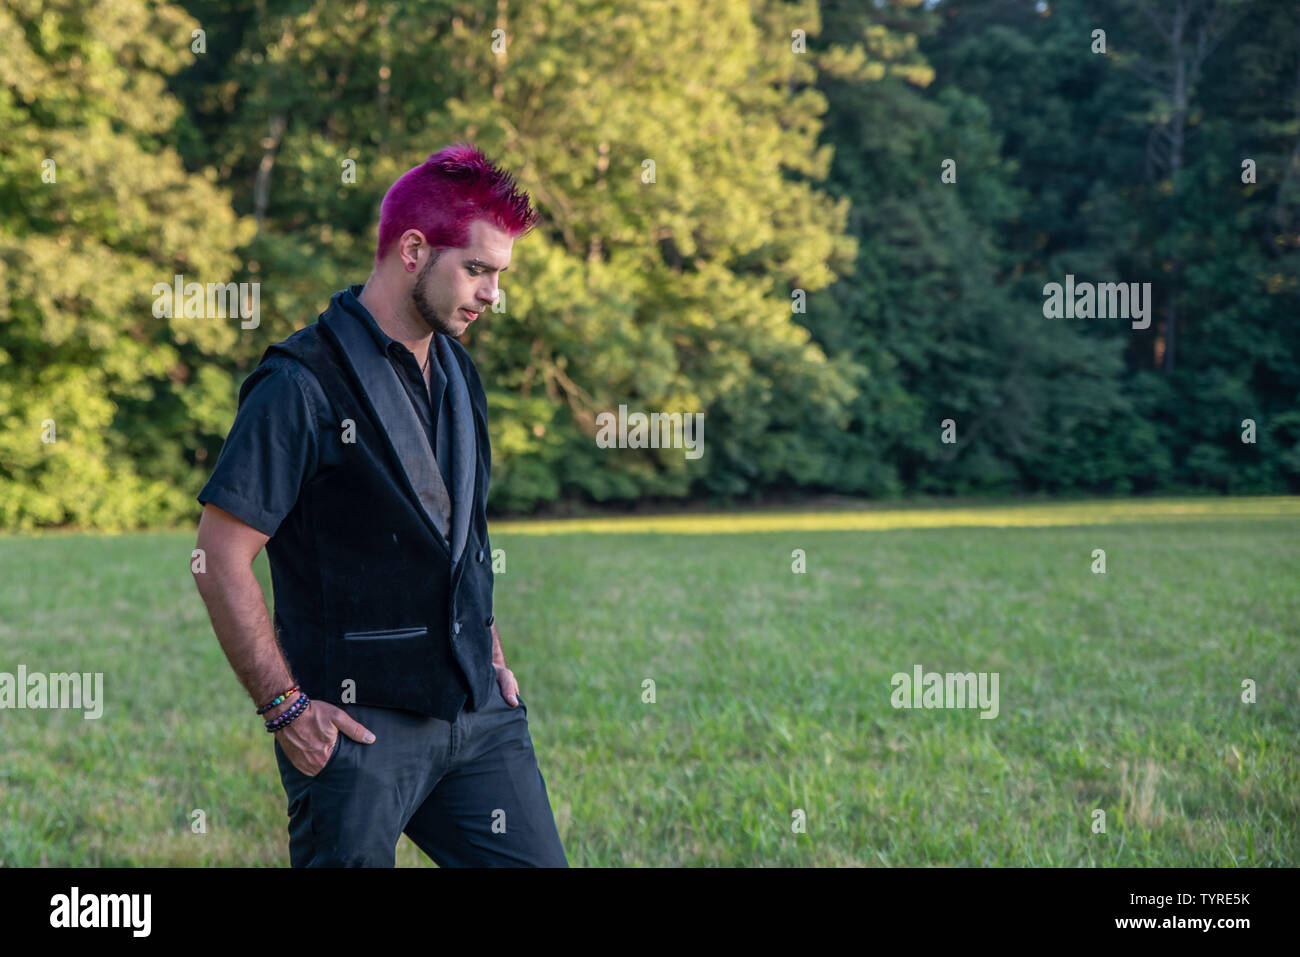 Diverse alternative looking white male caucasian with spkiy pink hair staring down at the ground. Feeling depressed, sad, or defeated. Pierced brow. Stock Photo